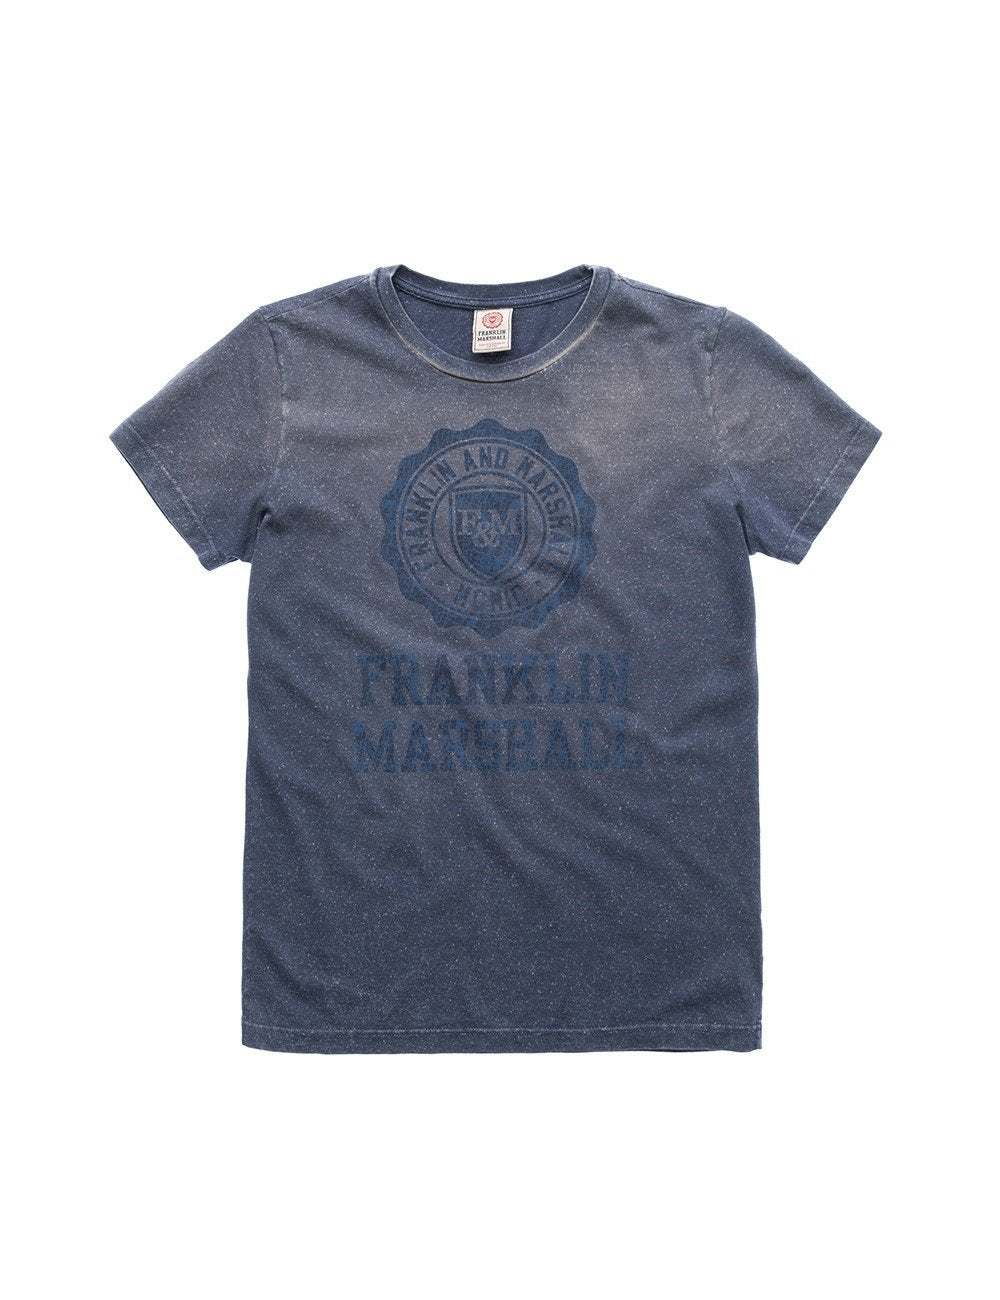 Franklin & Marshall T-Shirt in Jersey Navy Effetto Vintage